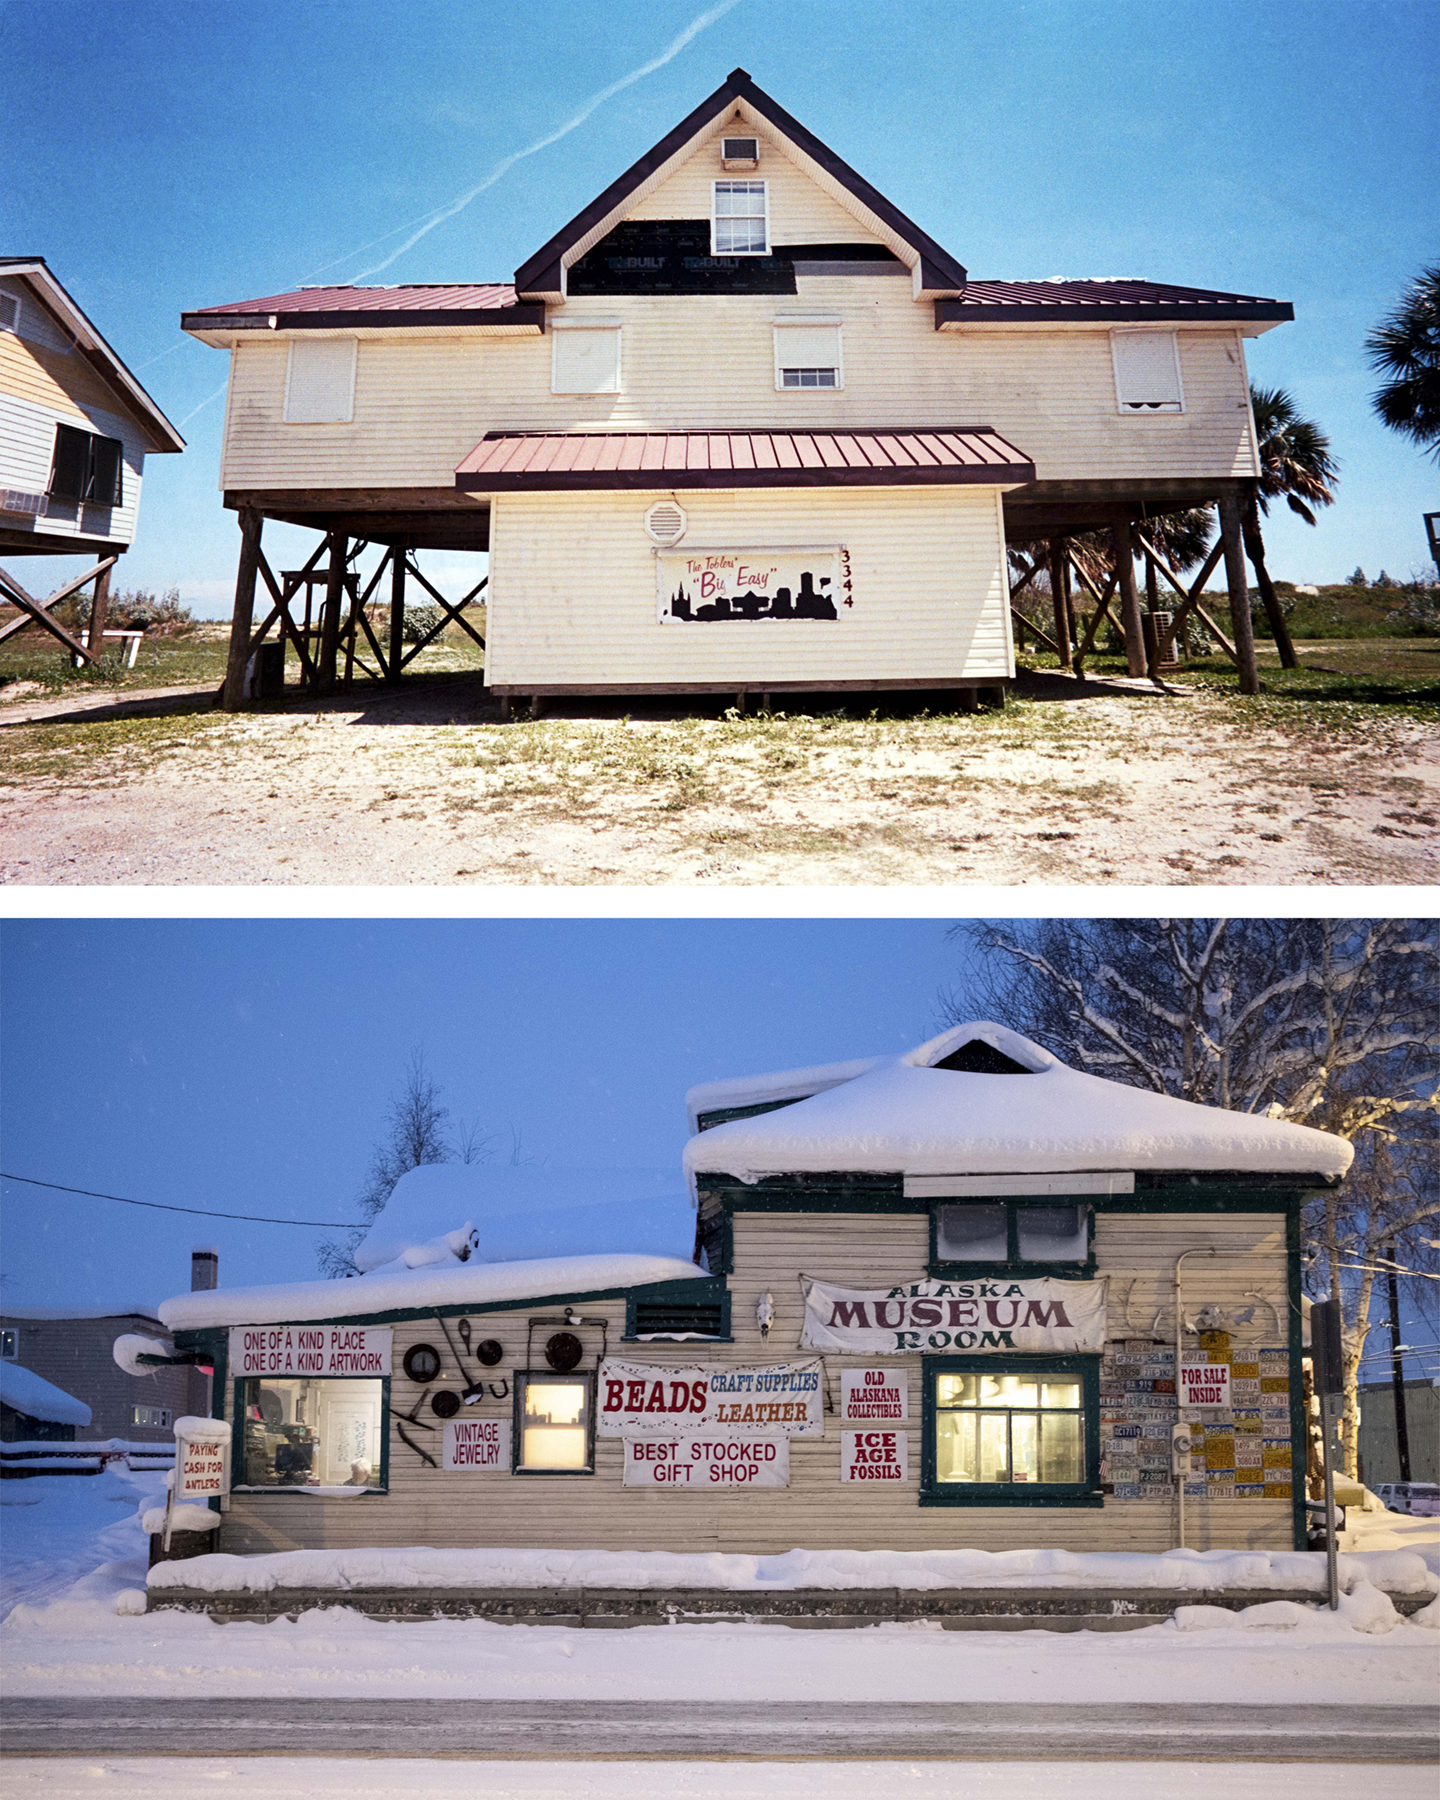 Homefront on the beach in Louisiana versus Alaska museum storefront in downtown Fairbanks, courtesy of the artist